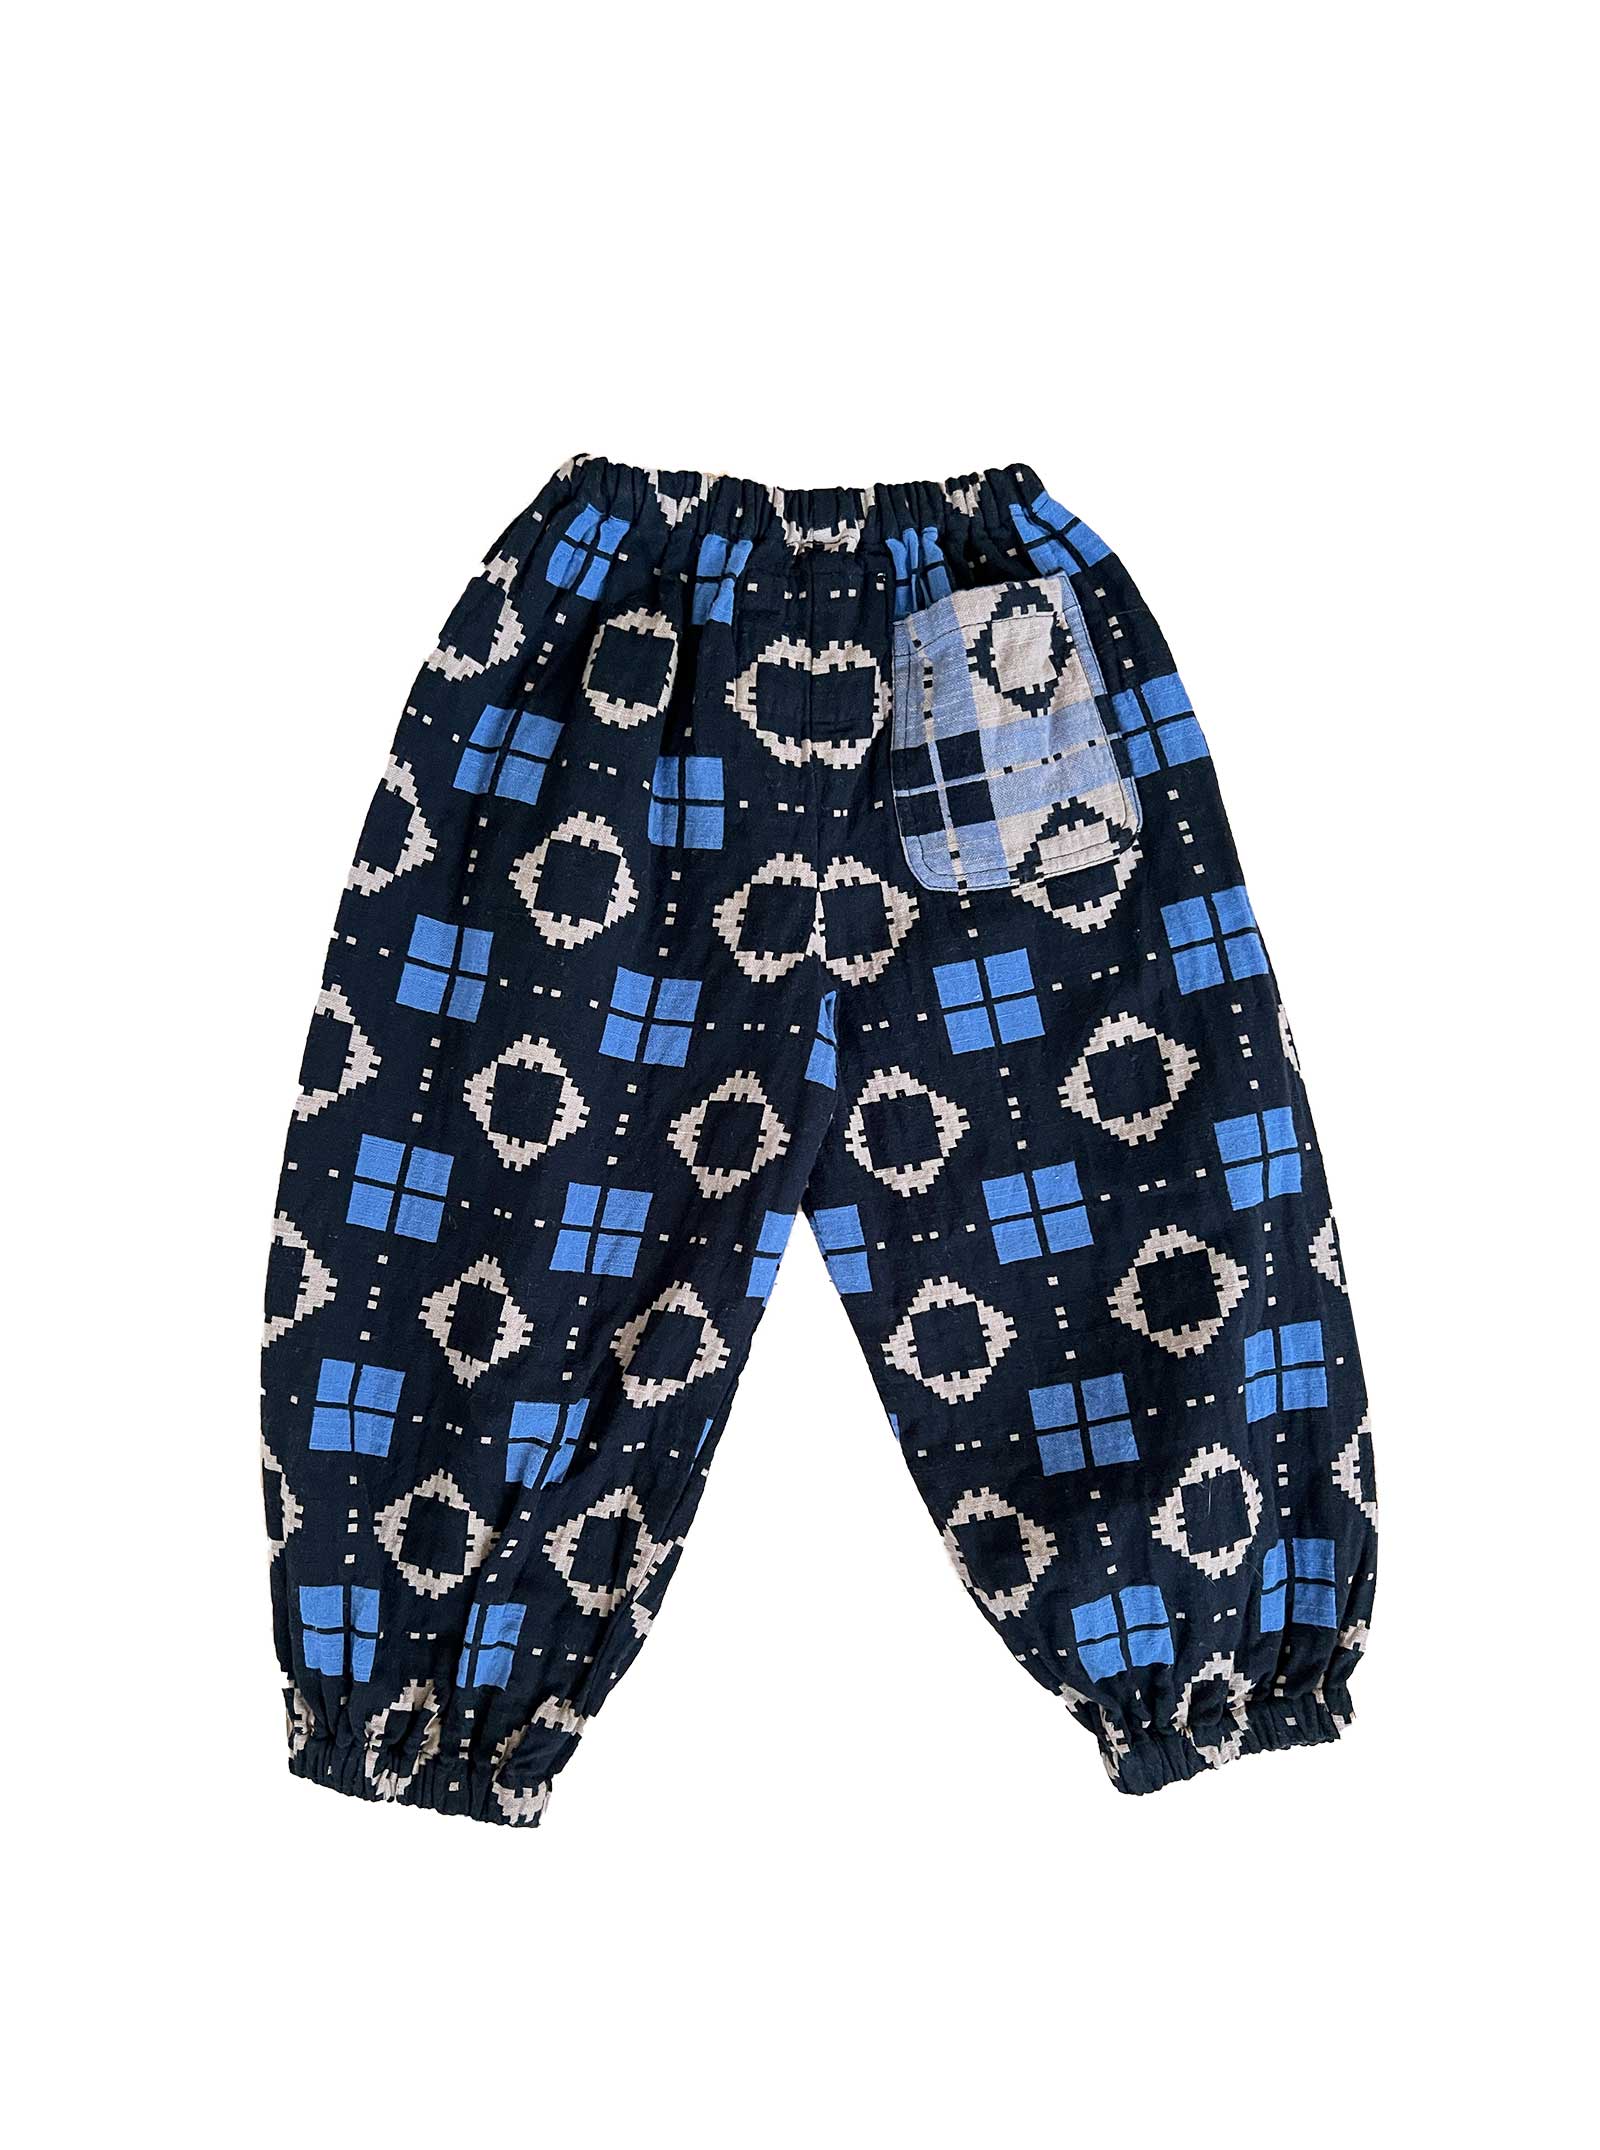 Balloon Plaid S00 - New - For Baby